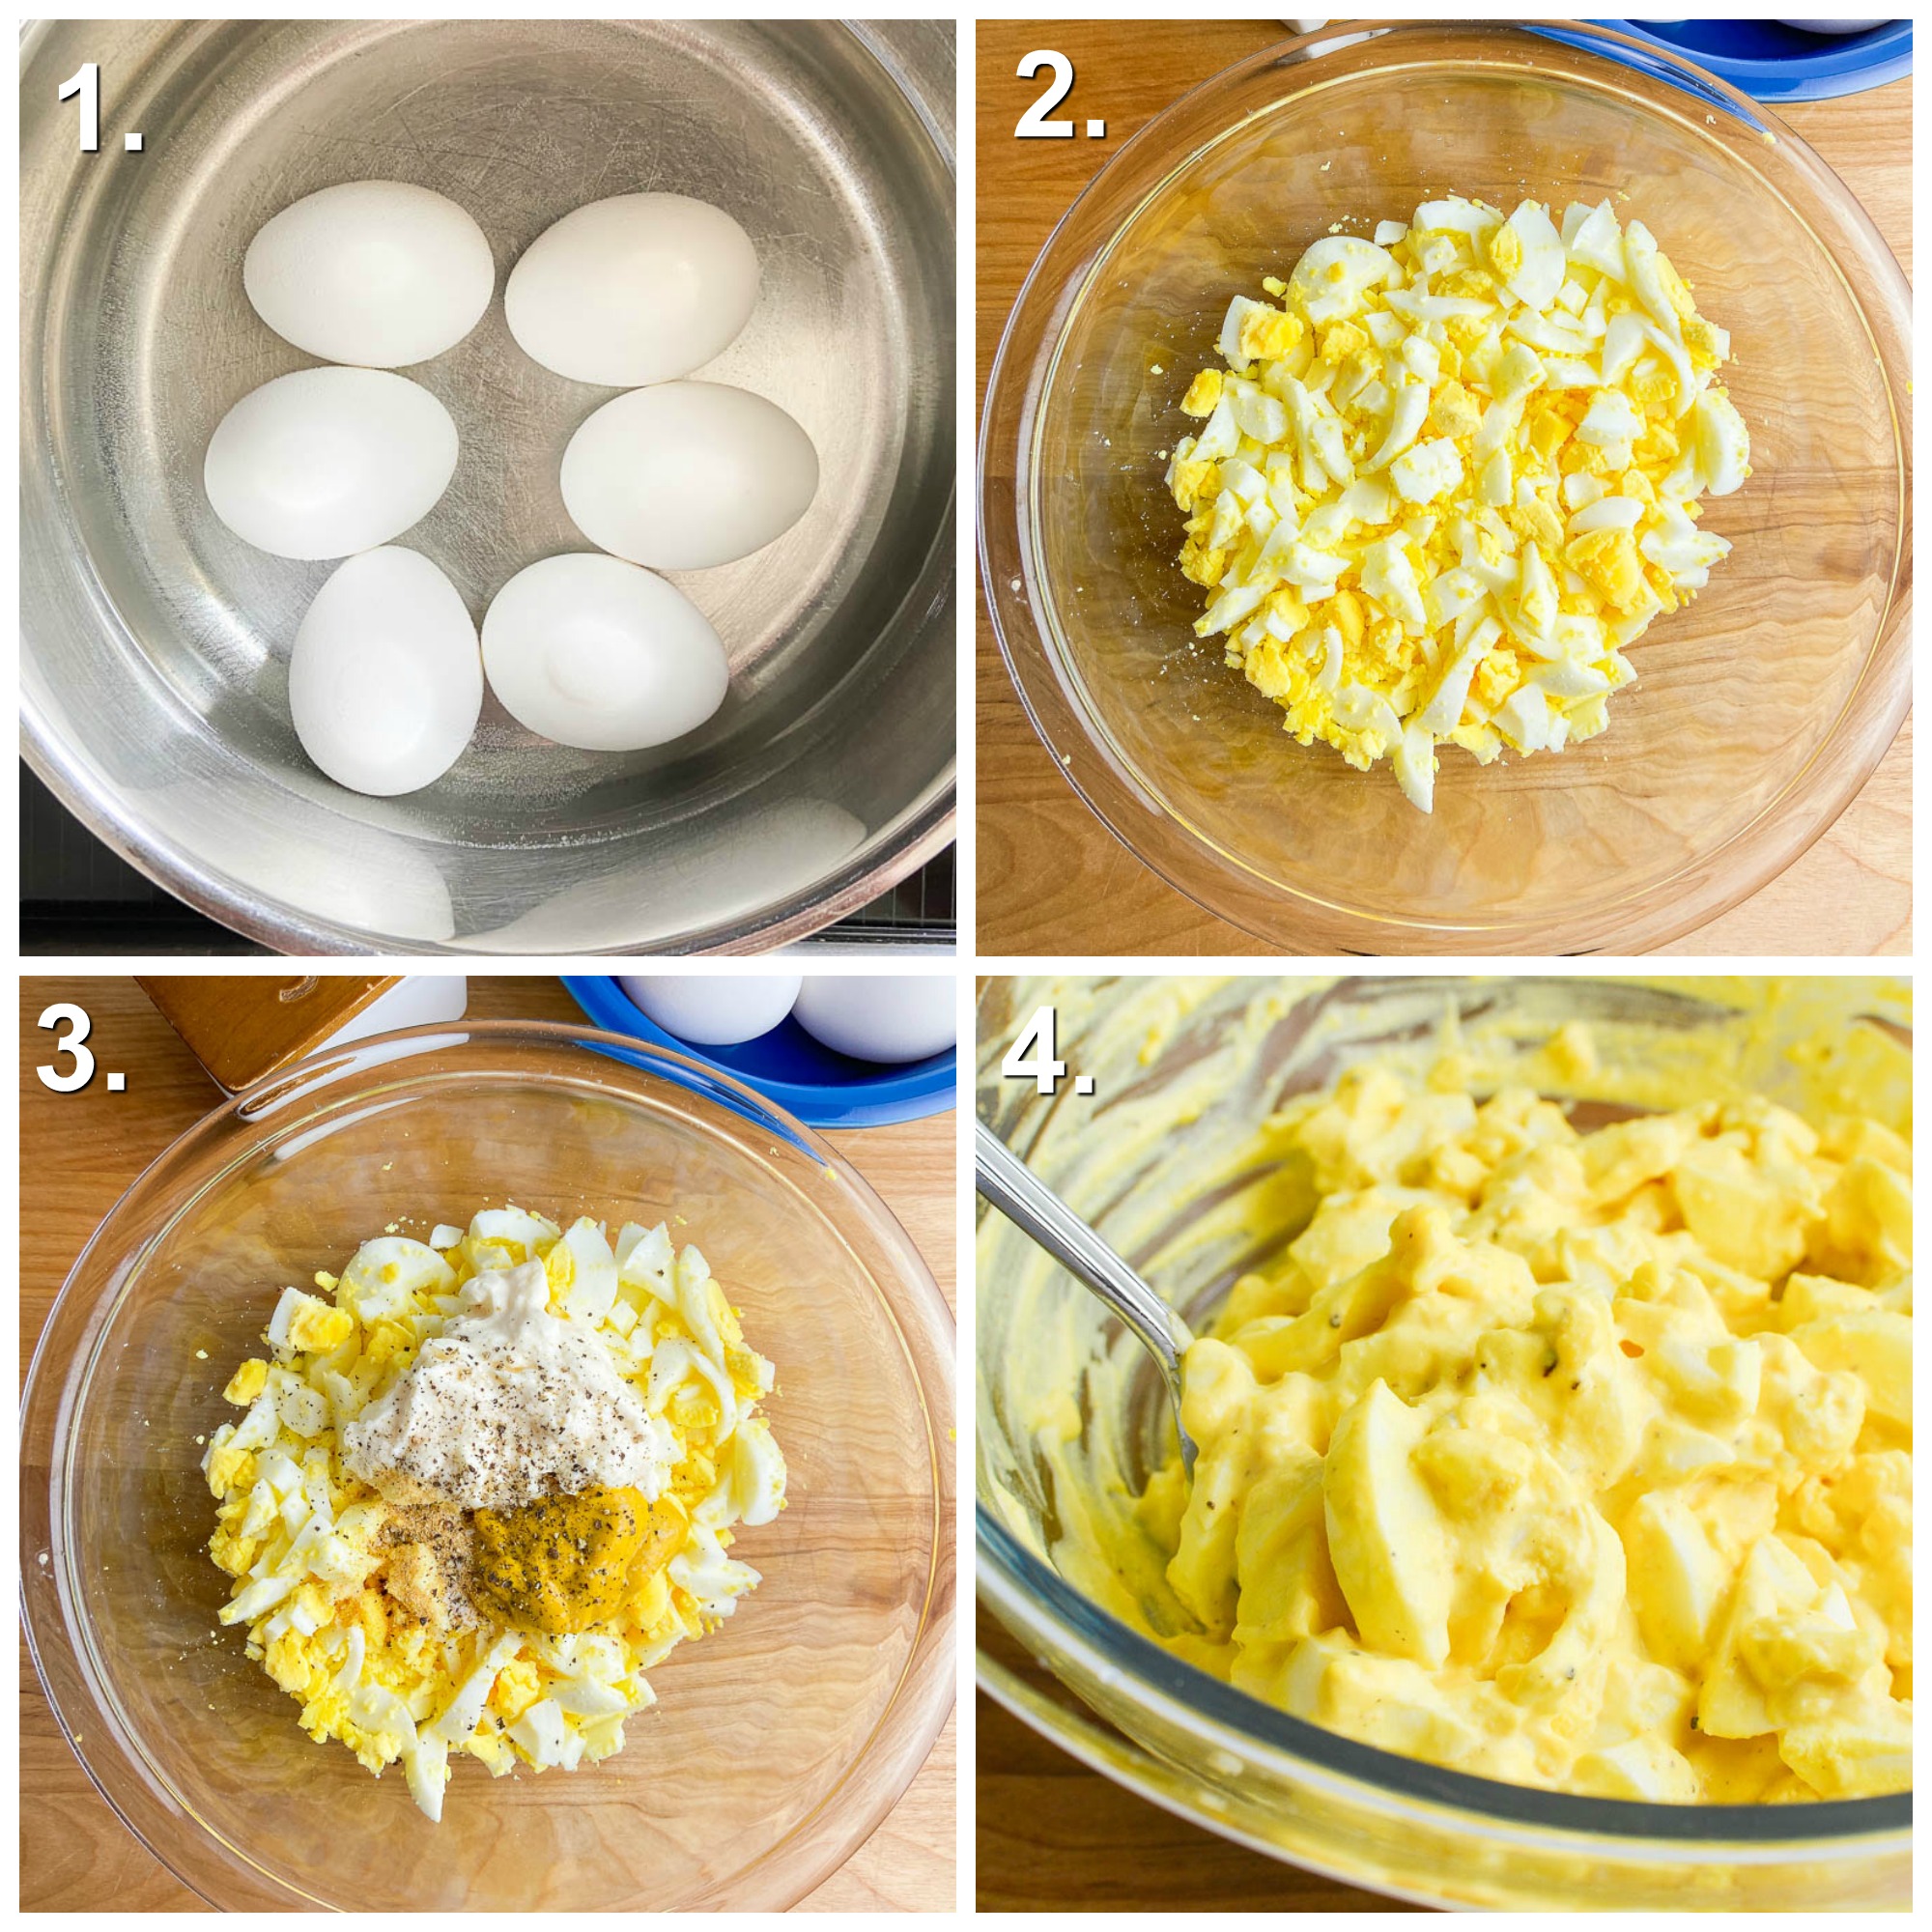 Step by Step Photos for how to make egg salad. Photo 1: hard boiled eggs Photo 2: chopped eggs in glass bowl. Photo 3: all ingredients in glass bowl Photo 4: Egg salad in glass bowl with spoon. 